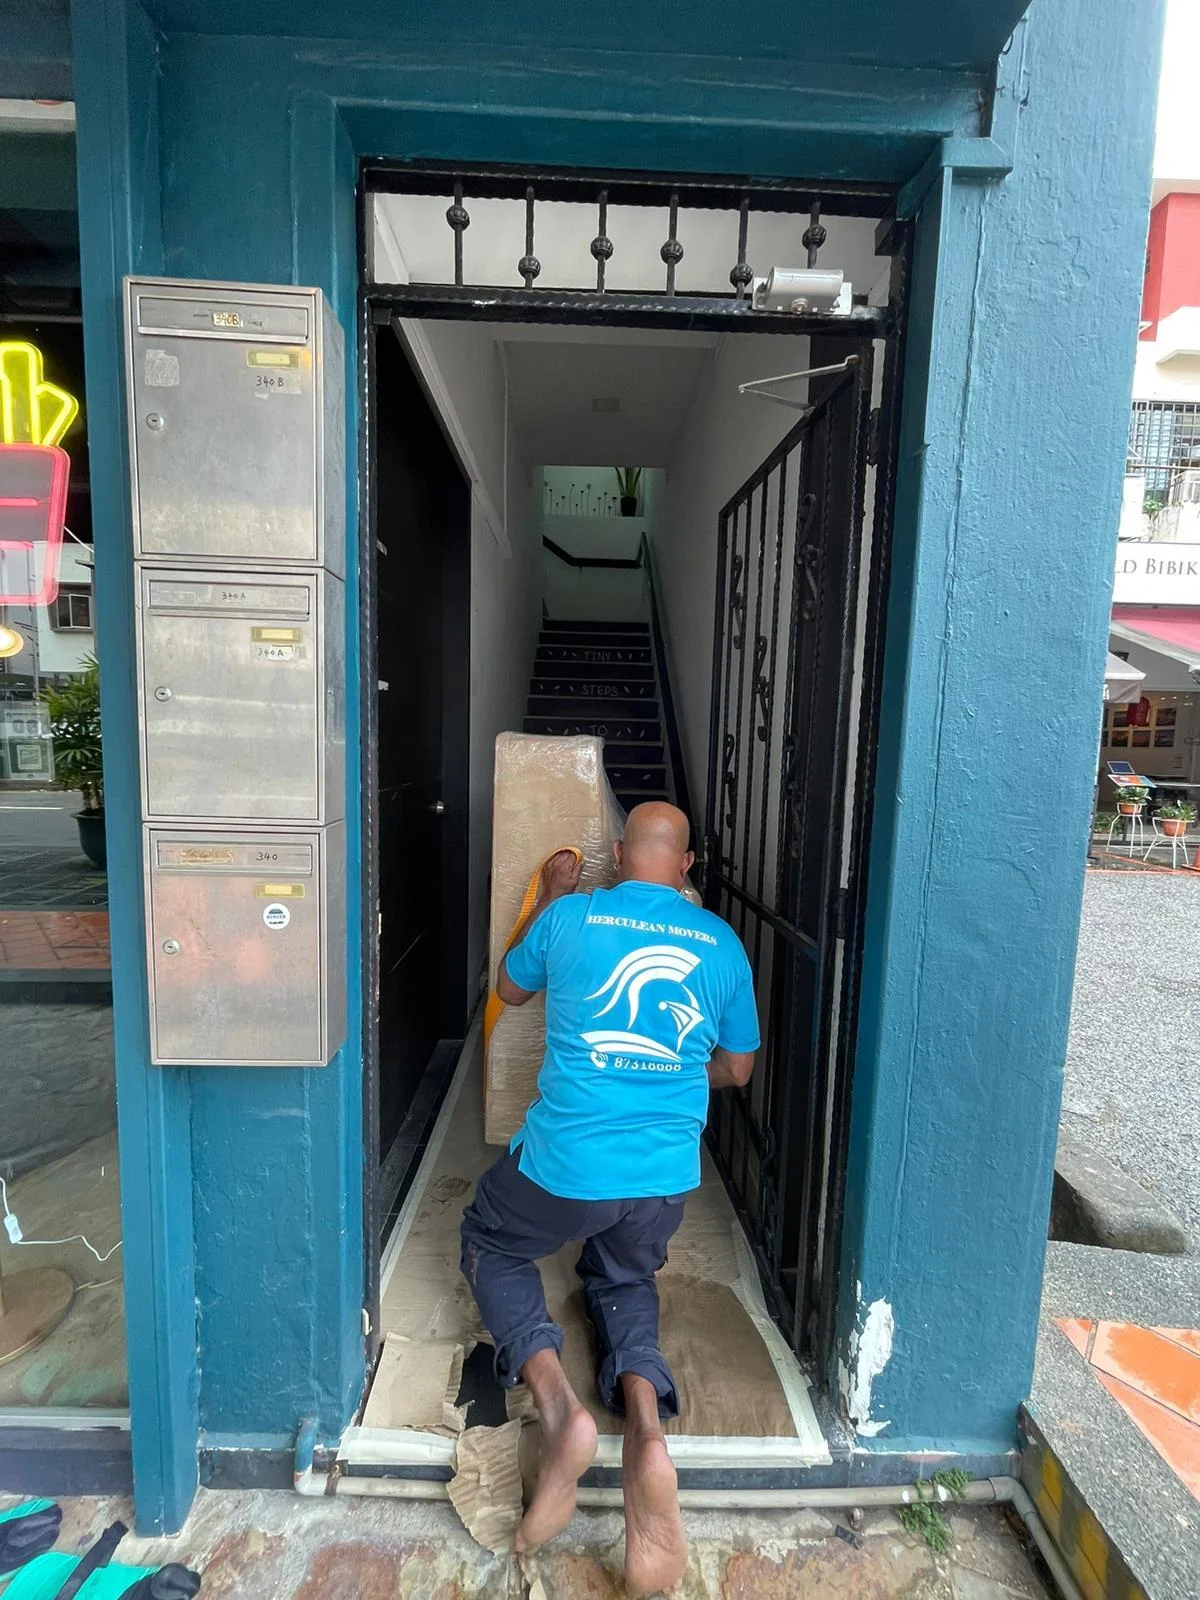 moving furniture out of building